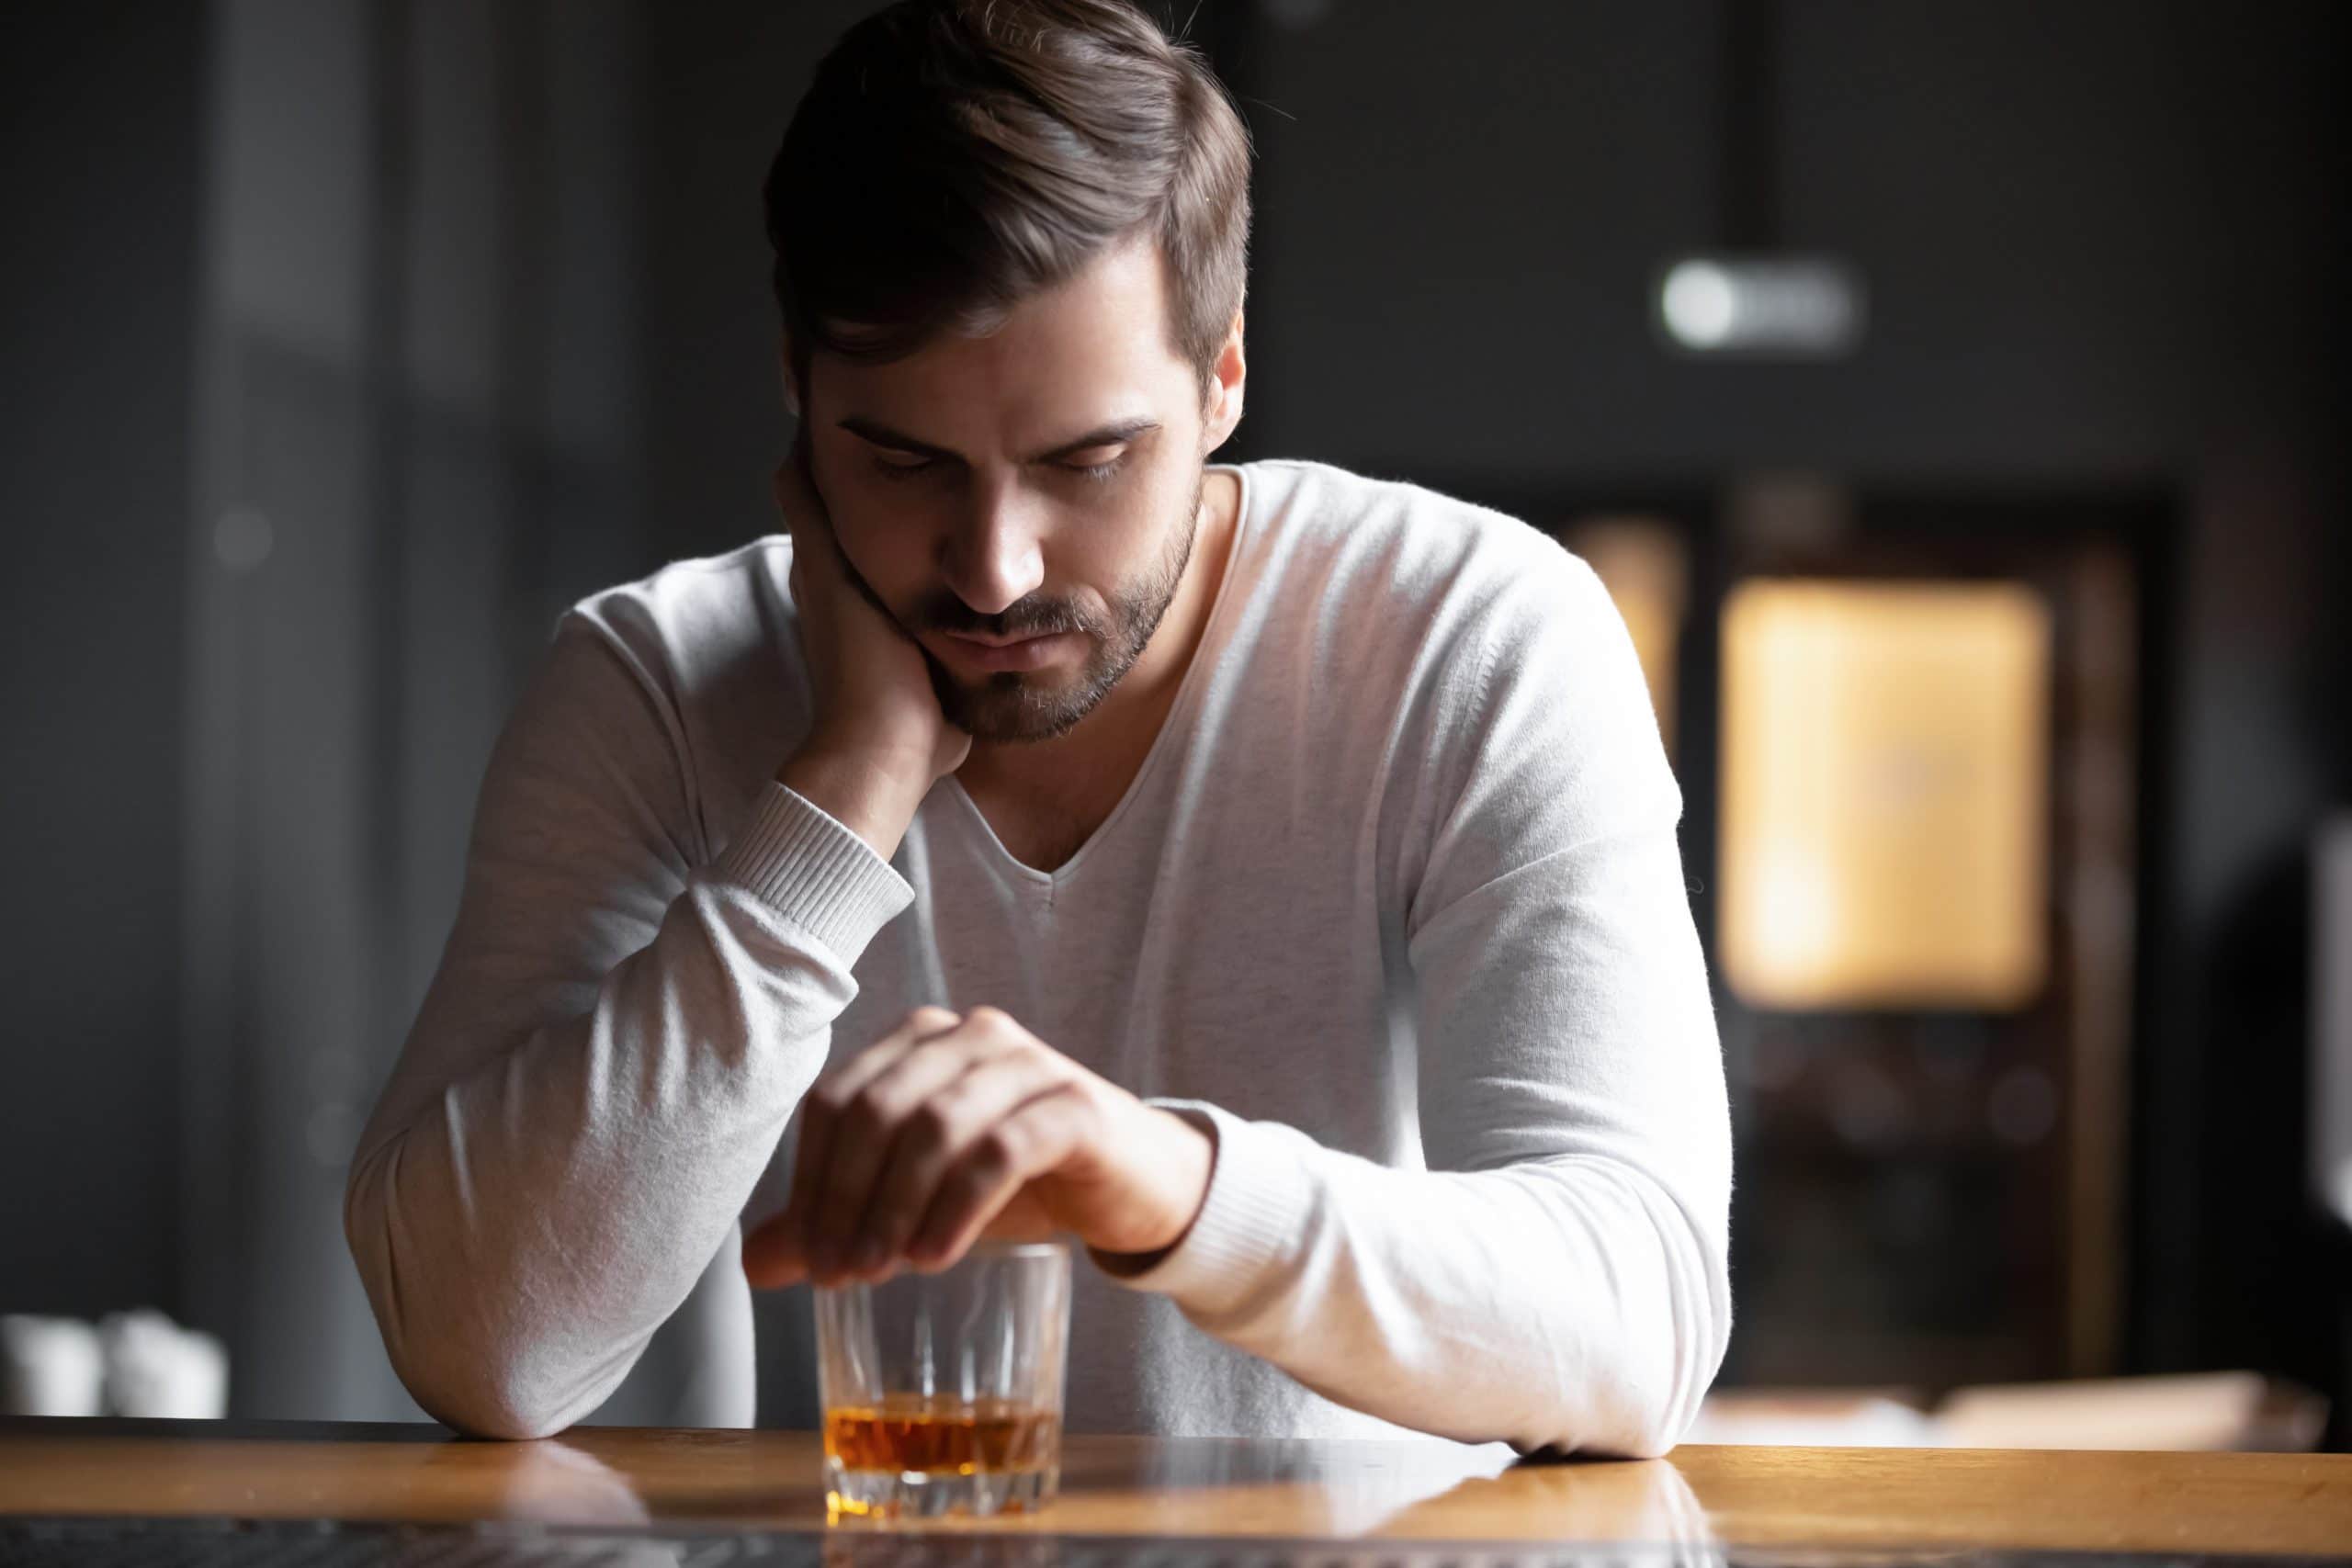 What To Expect If You Don’t Complete A Drug Rehabilitation Program After A DUI